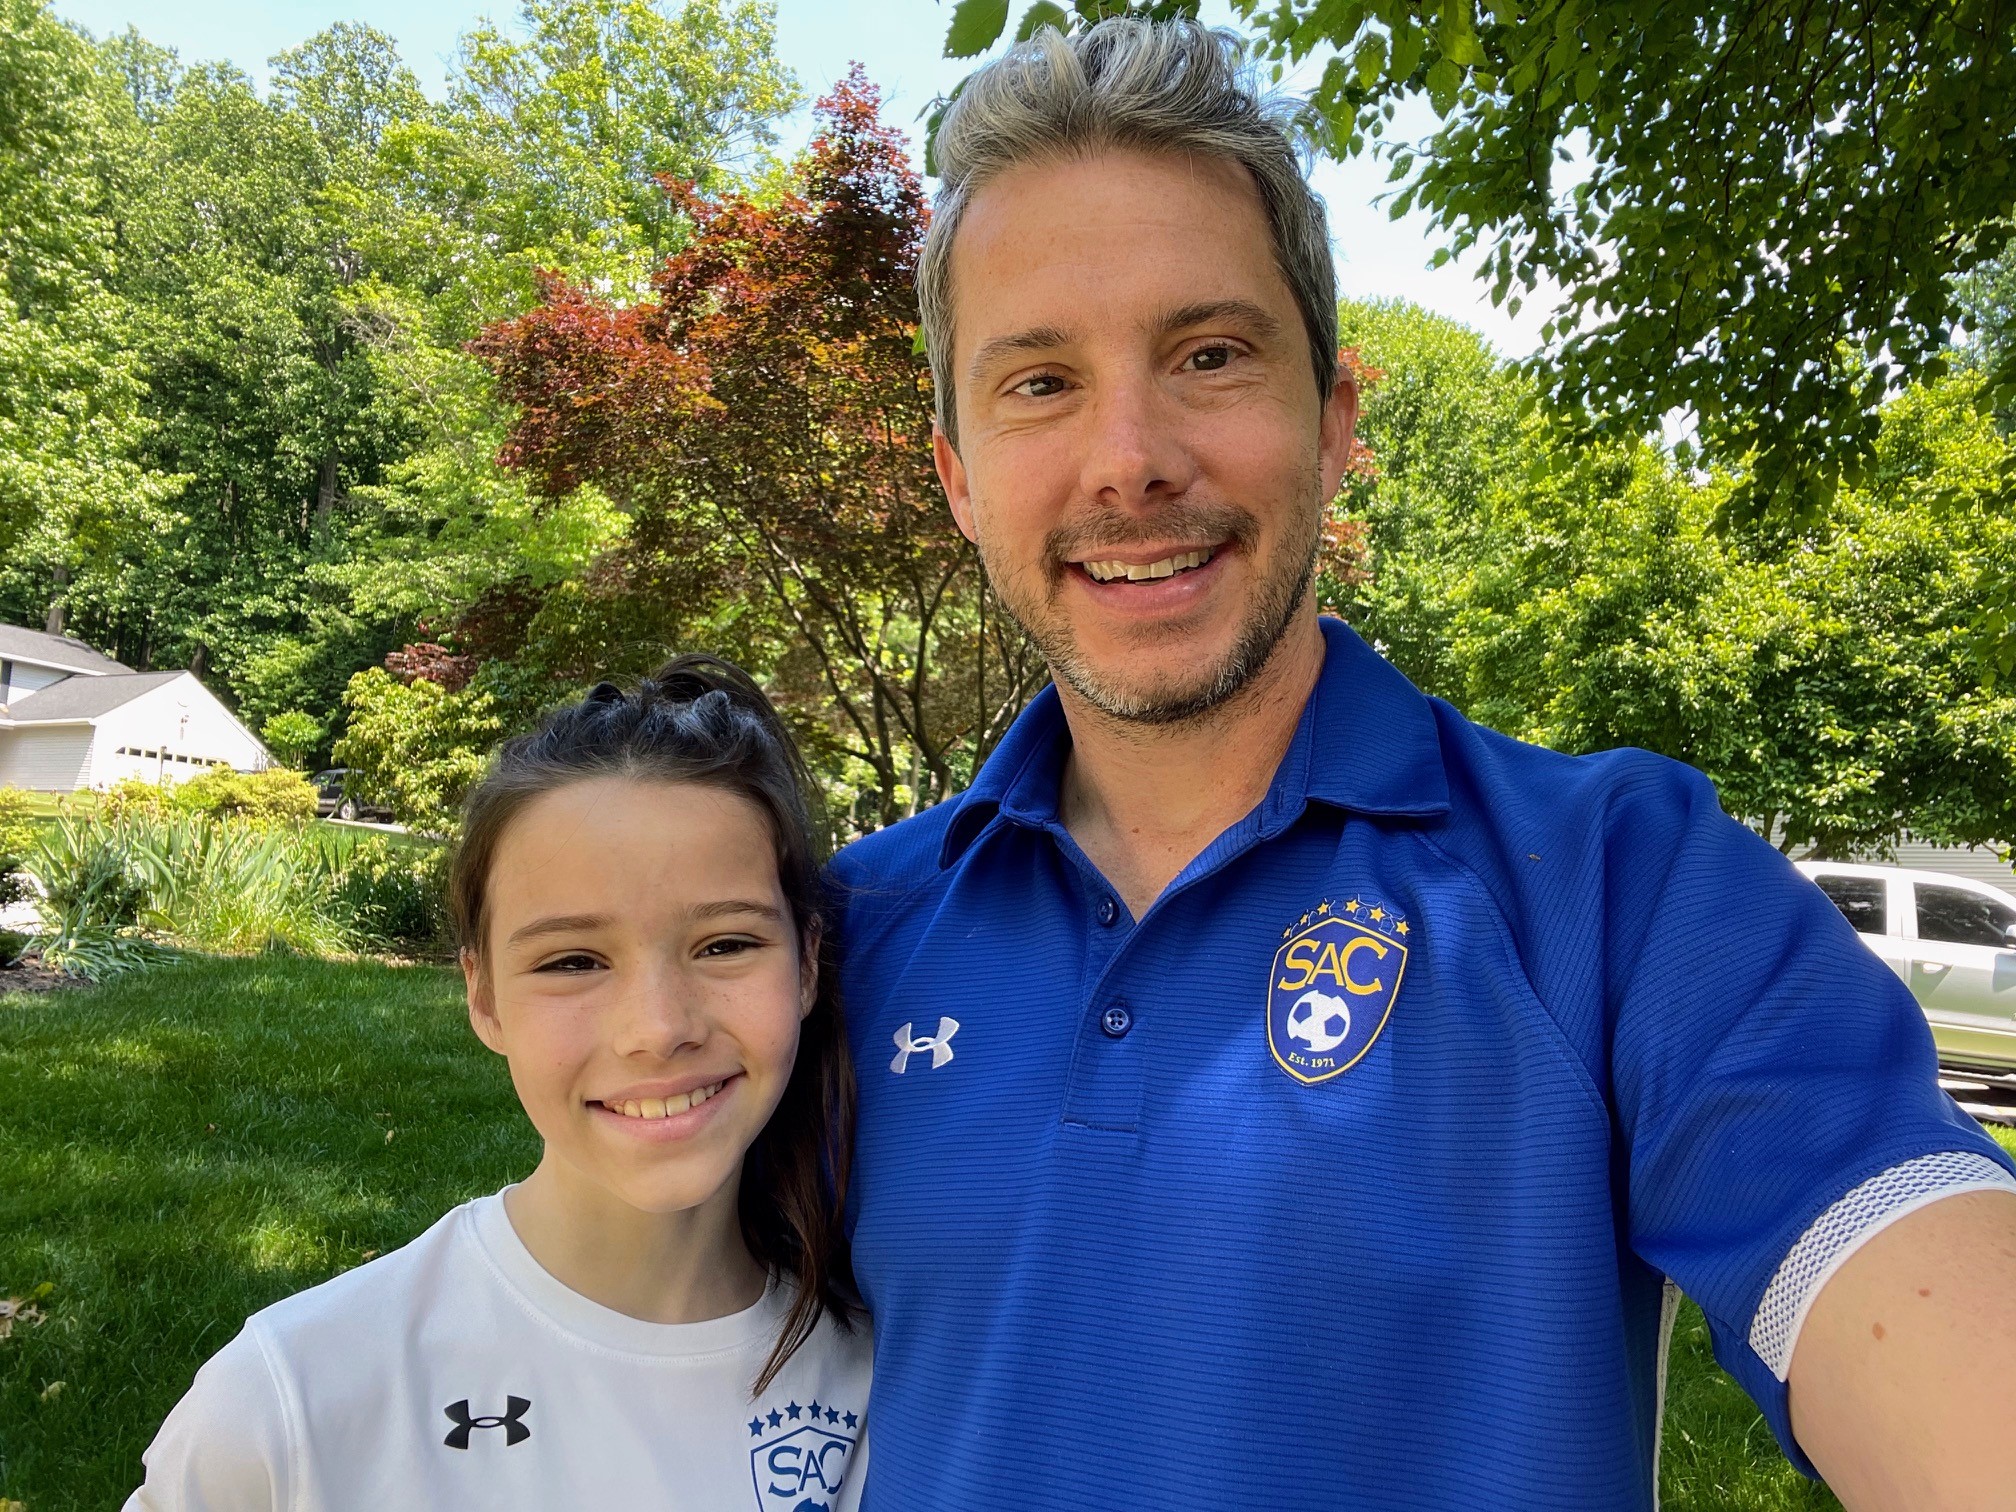 Joshua Abel, a man with short gray hair and a short dark gray beard, smiles and poses with his daughter for a selfie. Joshua wears a bright blue soccer polo and his daughter, a young girl with long dark hair, wears a white soccer jersey. They pose in the shade of a large tree, with yards, driveways and more trees visible behind them.